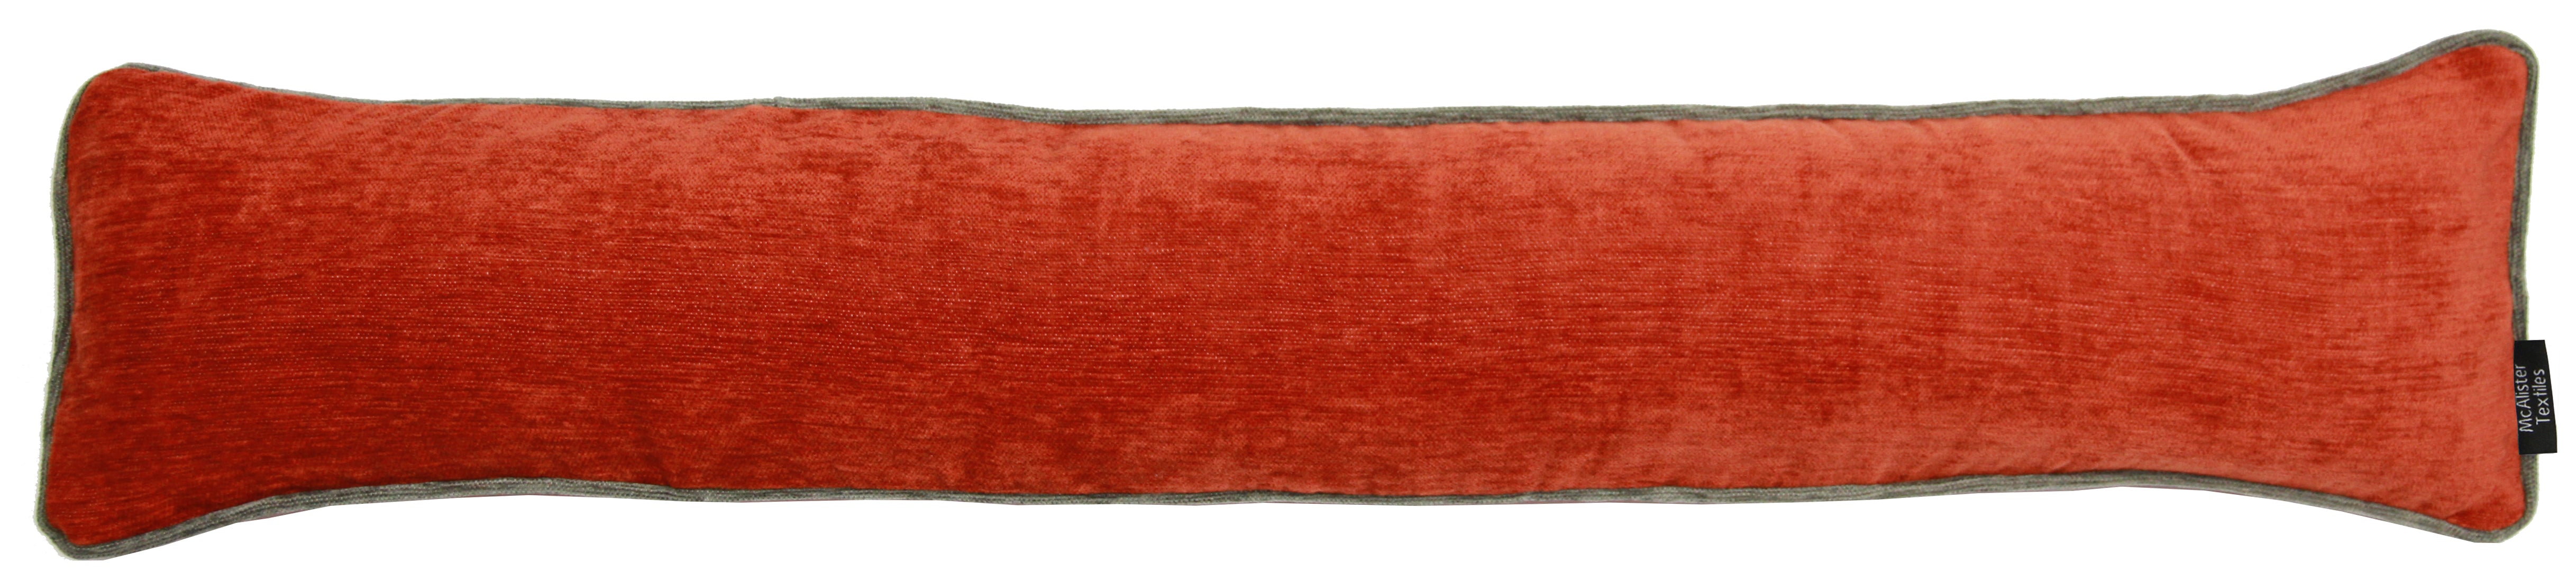 Plain Chenille Contrast Piped Burnt Orange + Grey Draught Excluder